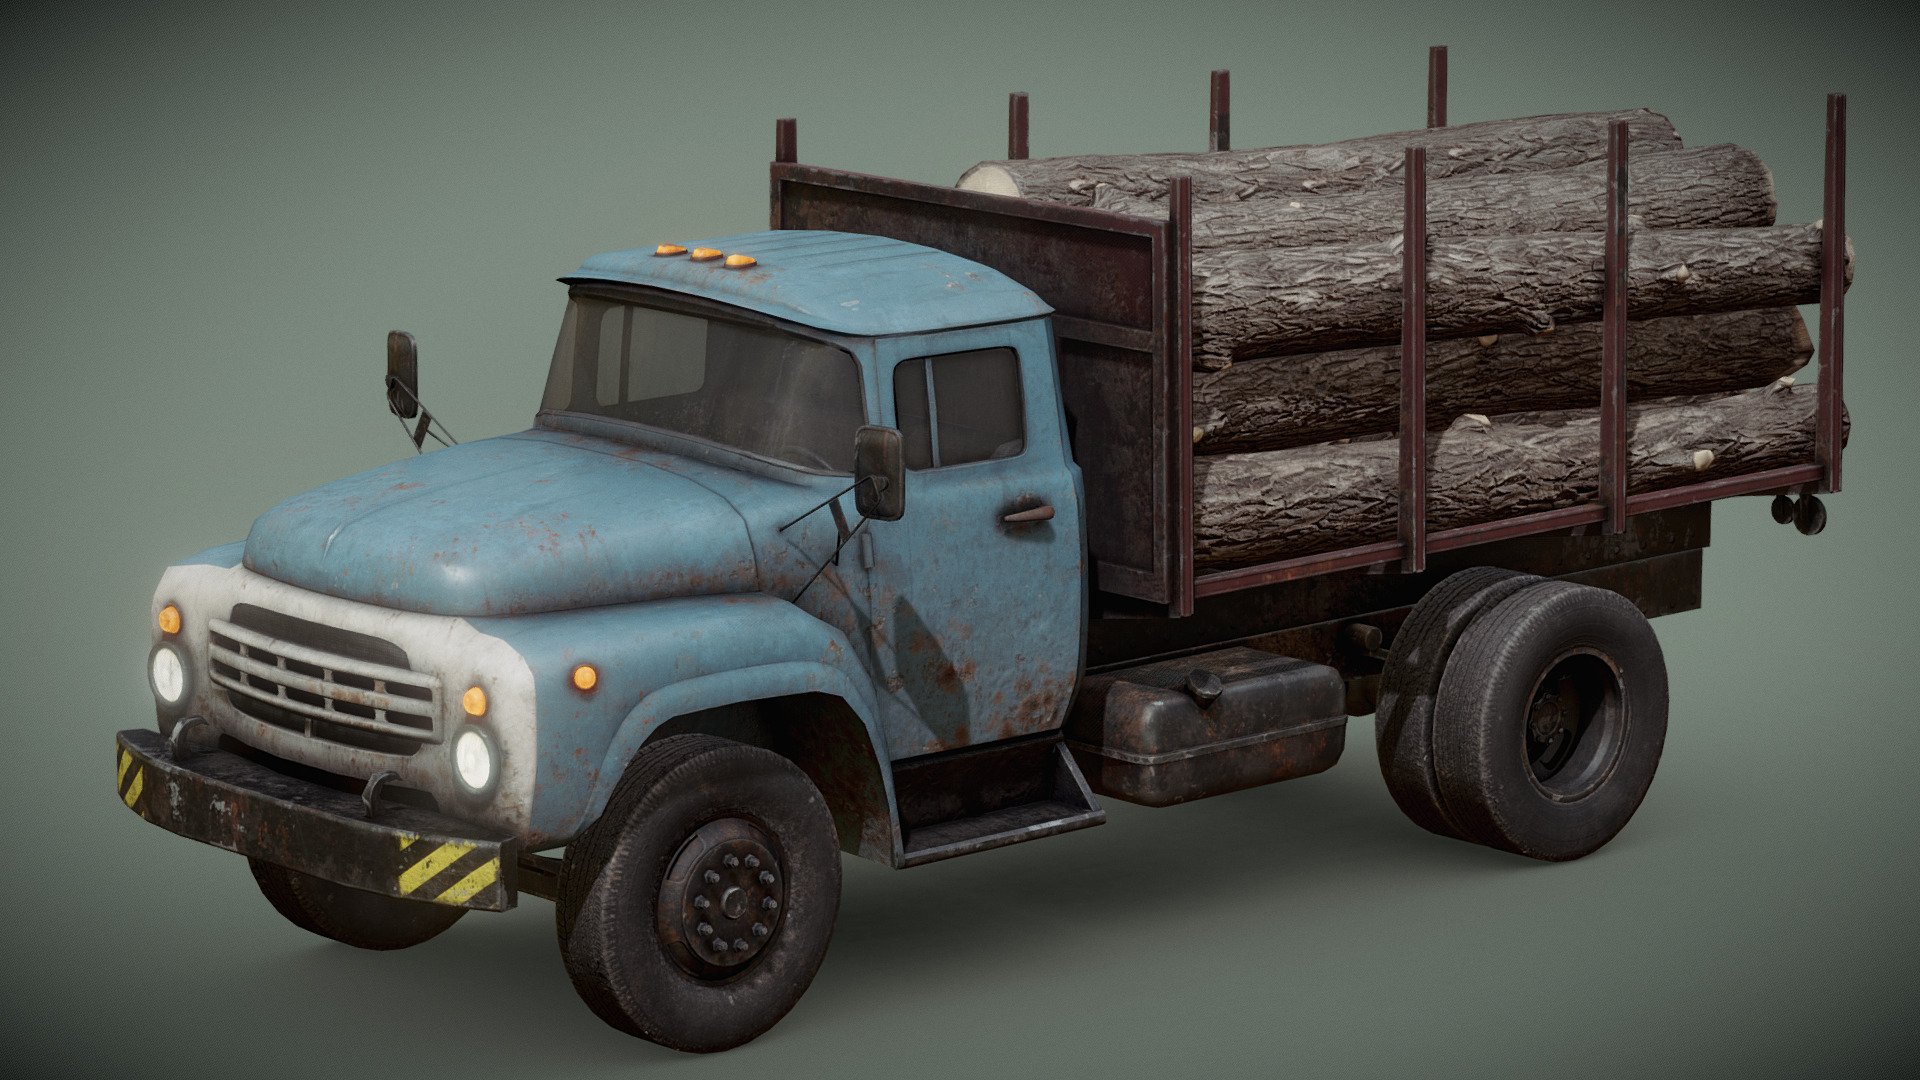 Old and rusty, Soviet truck inspired by the trucks produced by ZIL.
Here in a &ldquo;logging truck